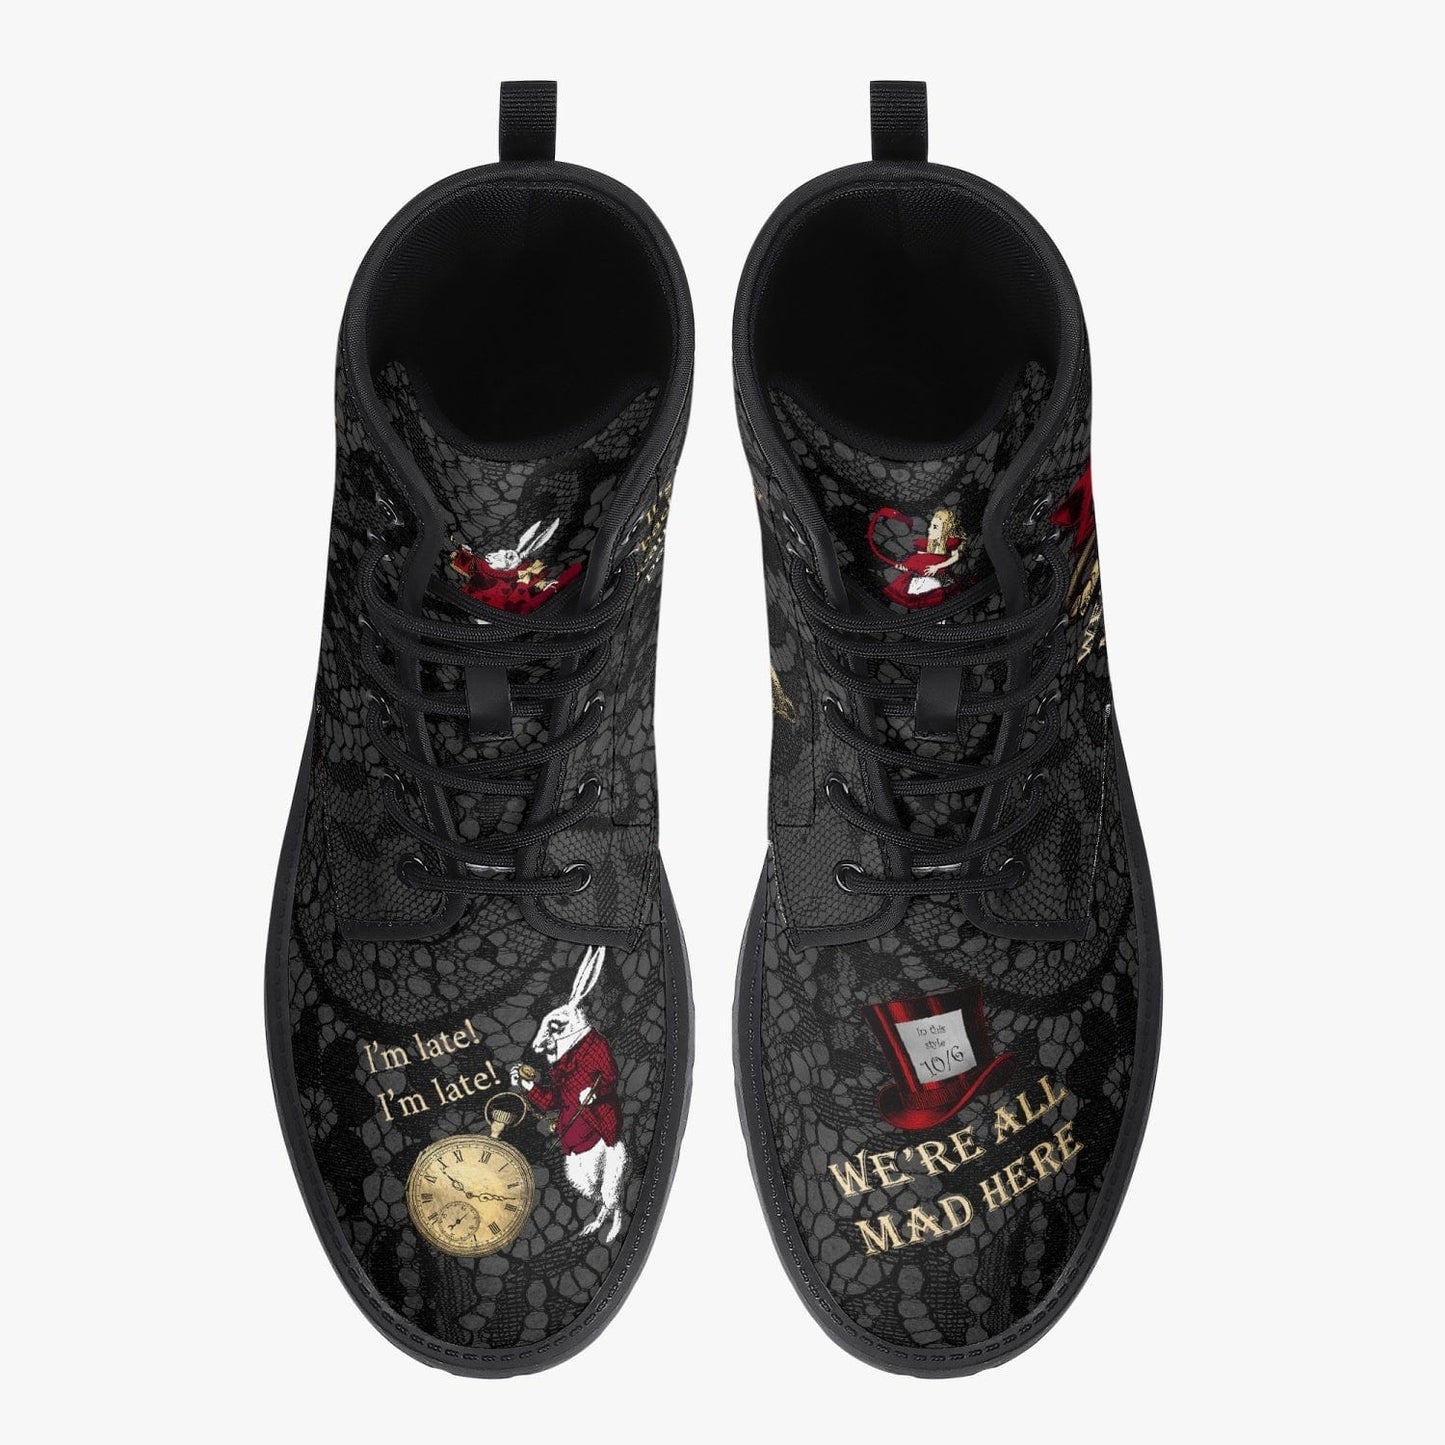 top view of the men's gothic black gold and red vegan boots featuring Alice in Wonderland quotes